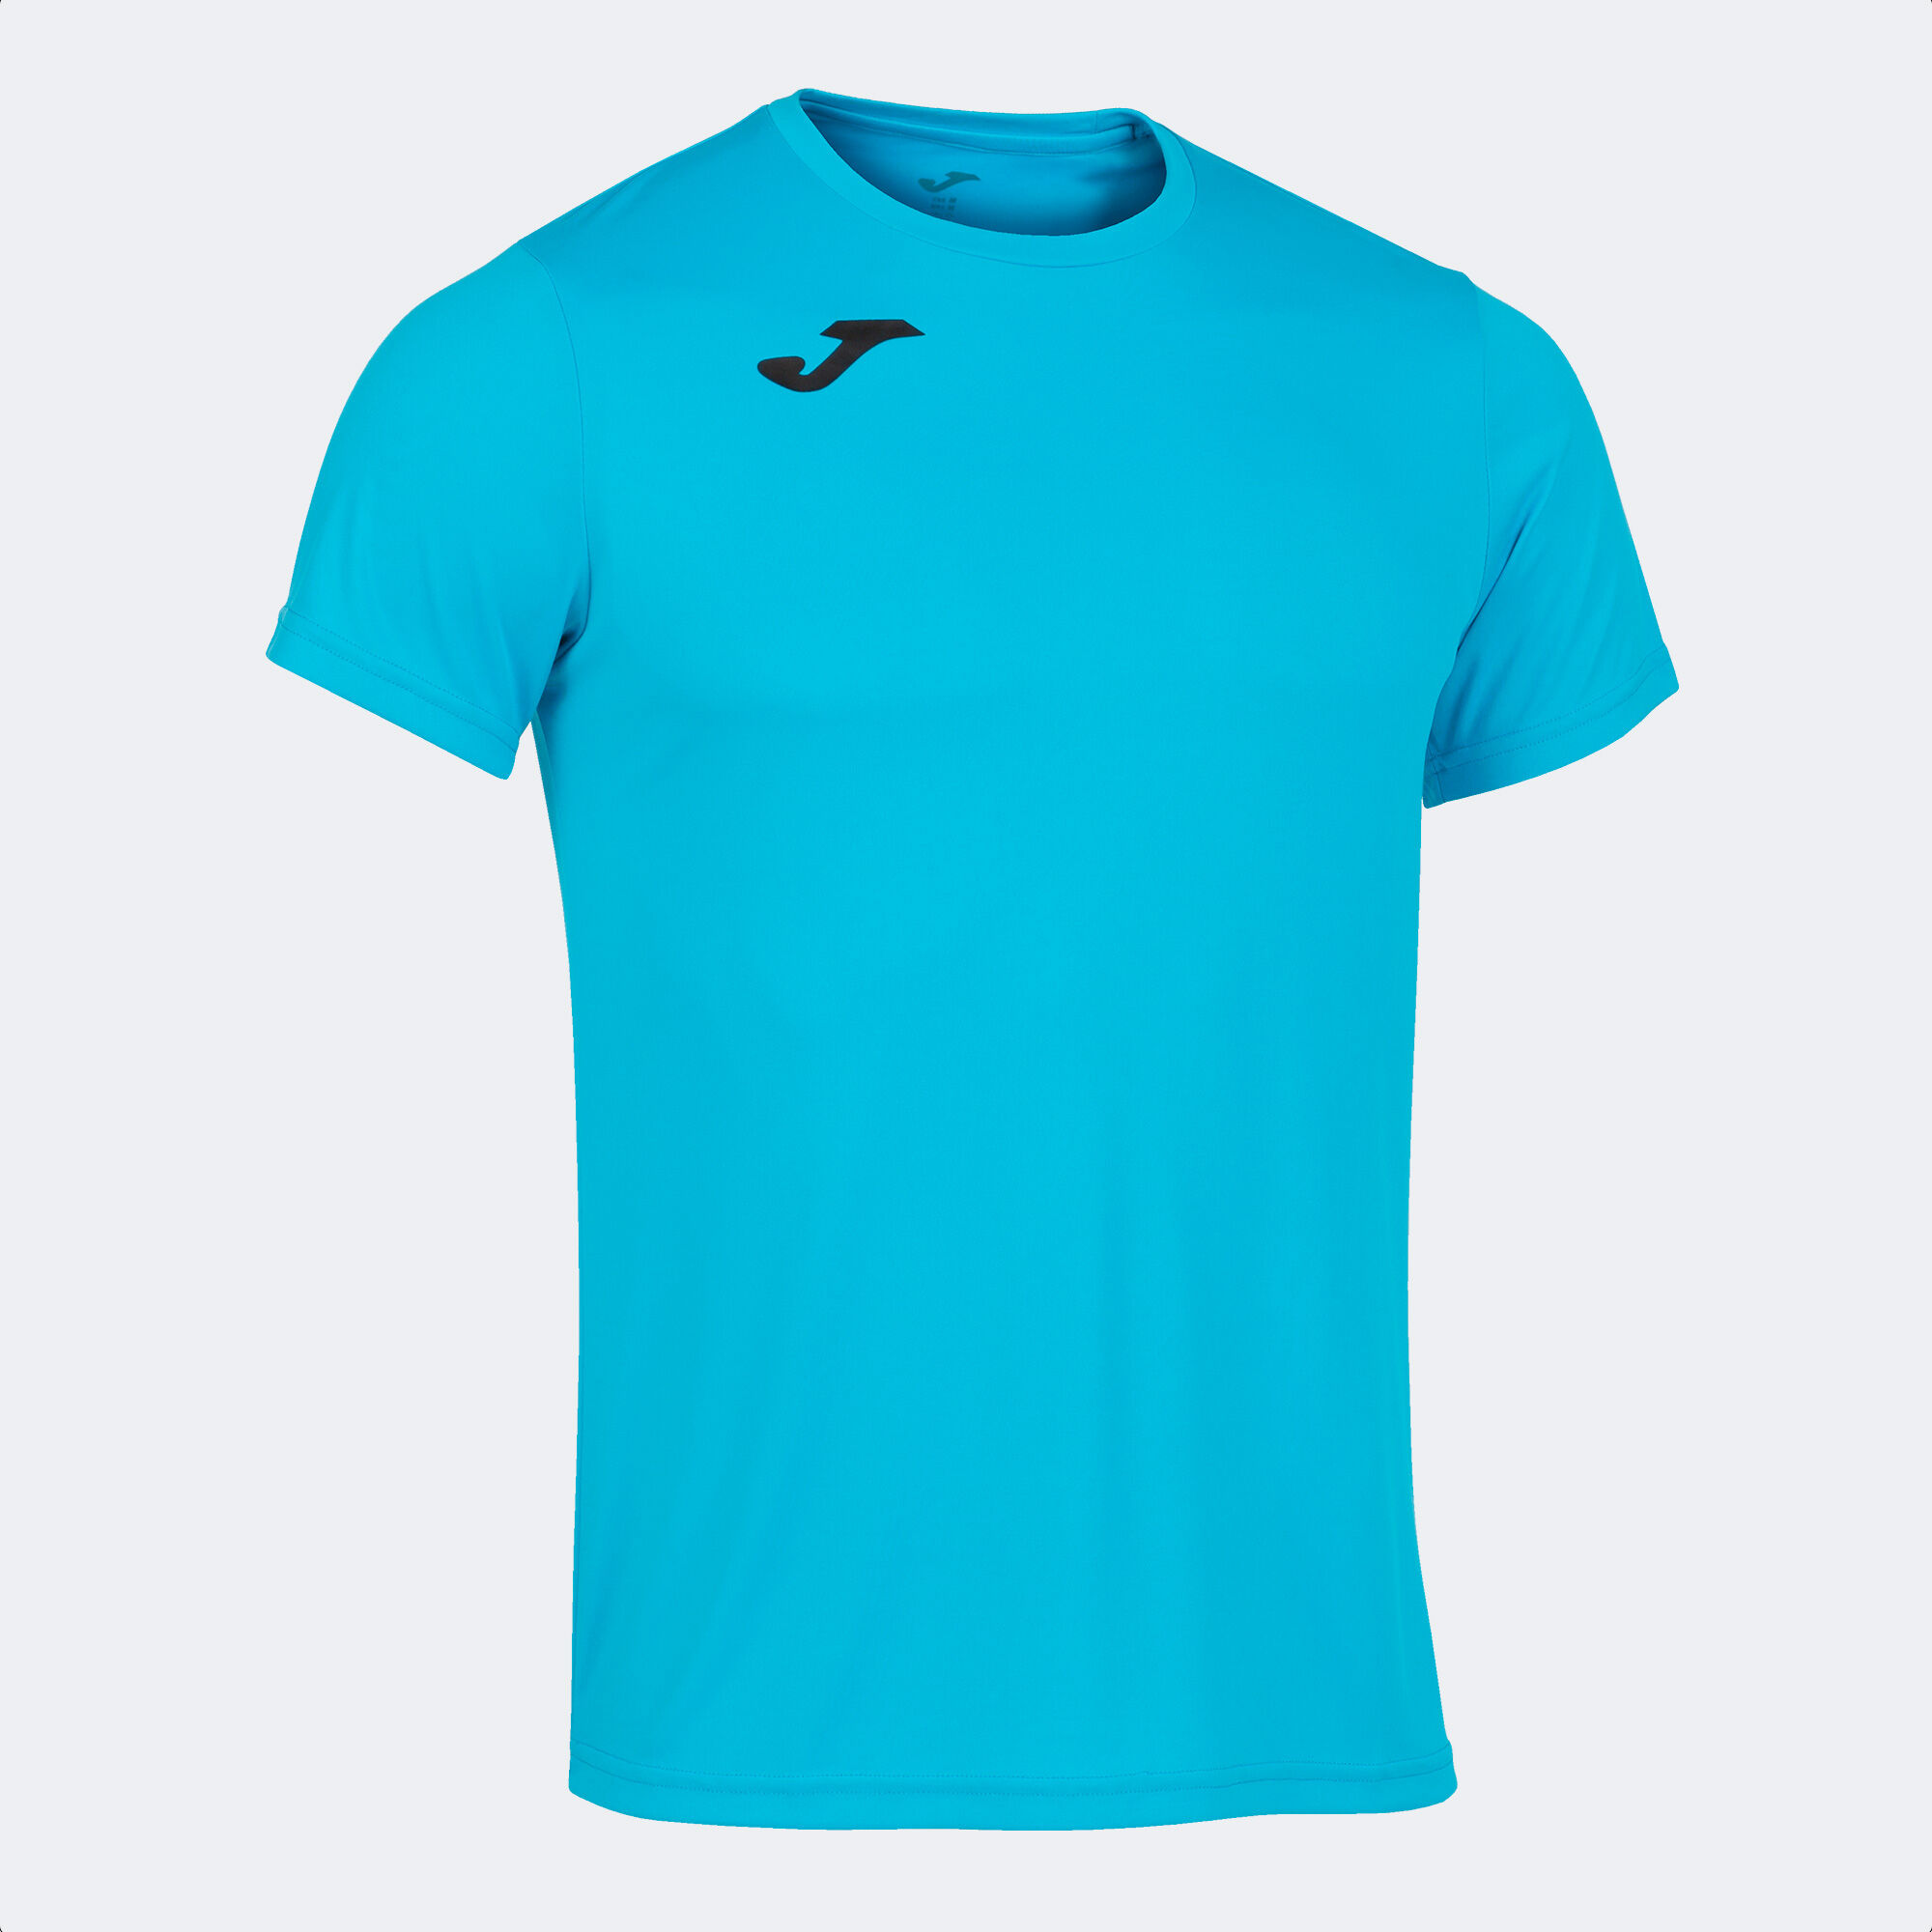 Maillot manches courtes homme Record II turquoise fluo